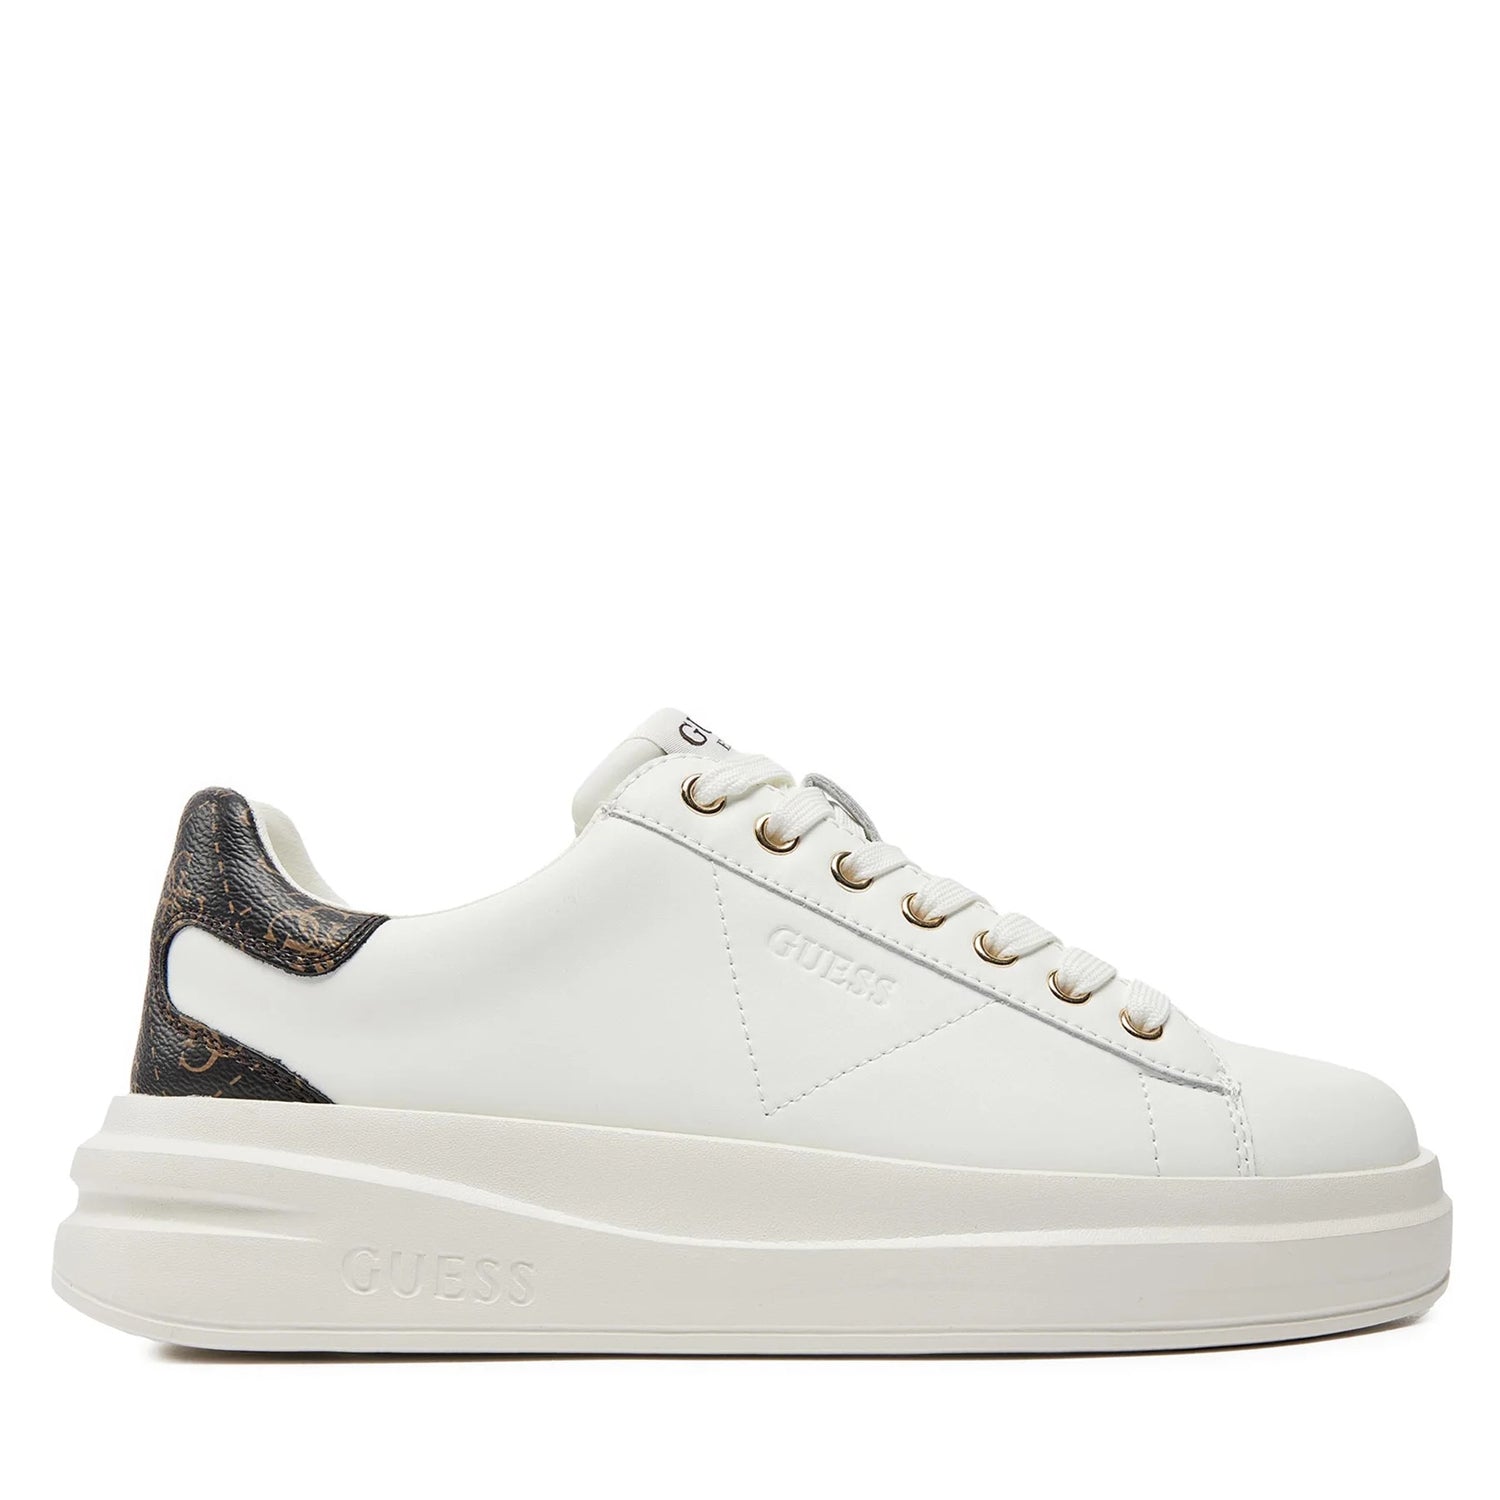 Guess Sapatilhas Sneakers Shoes Fljelb Whi Brown Branco Castanho_shot4